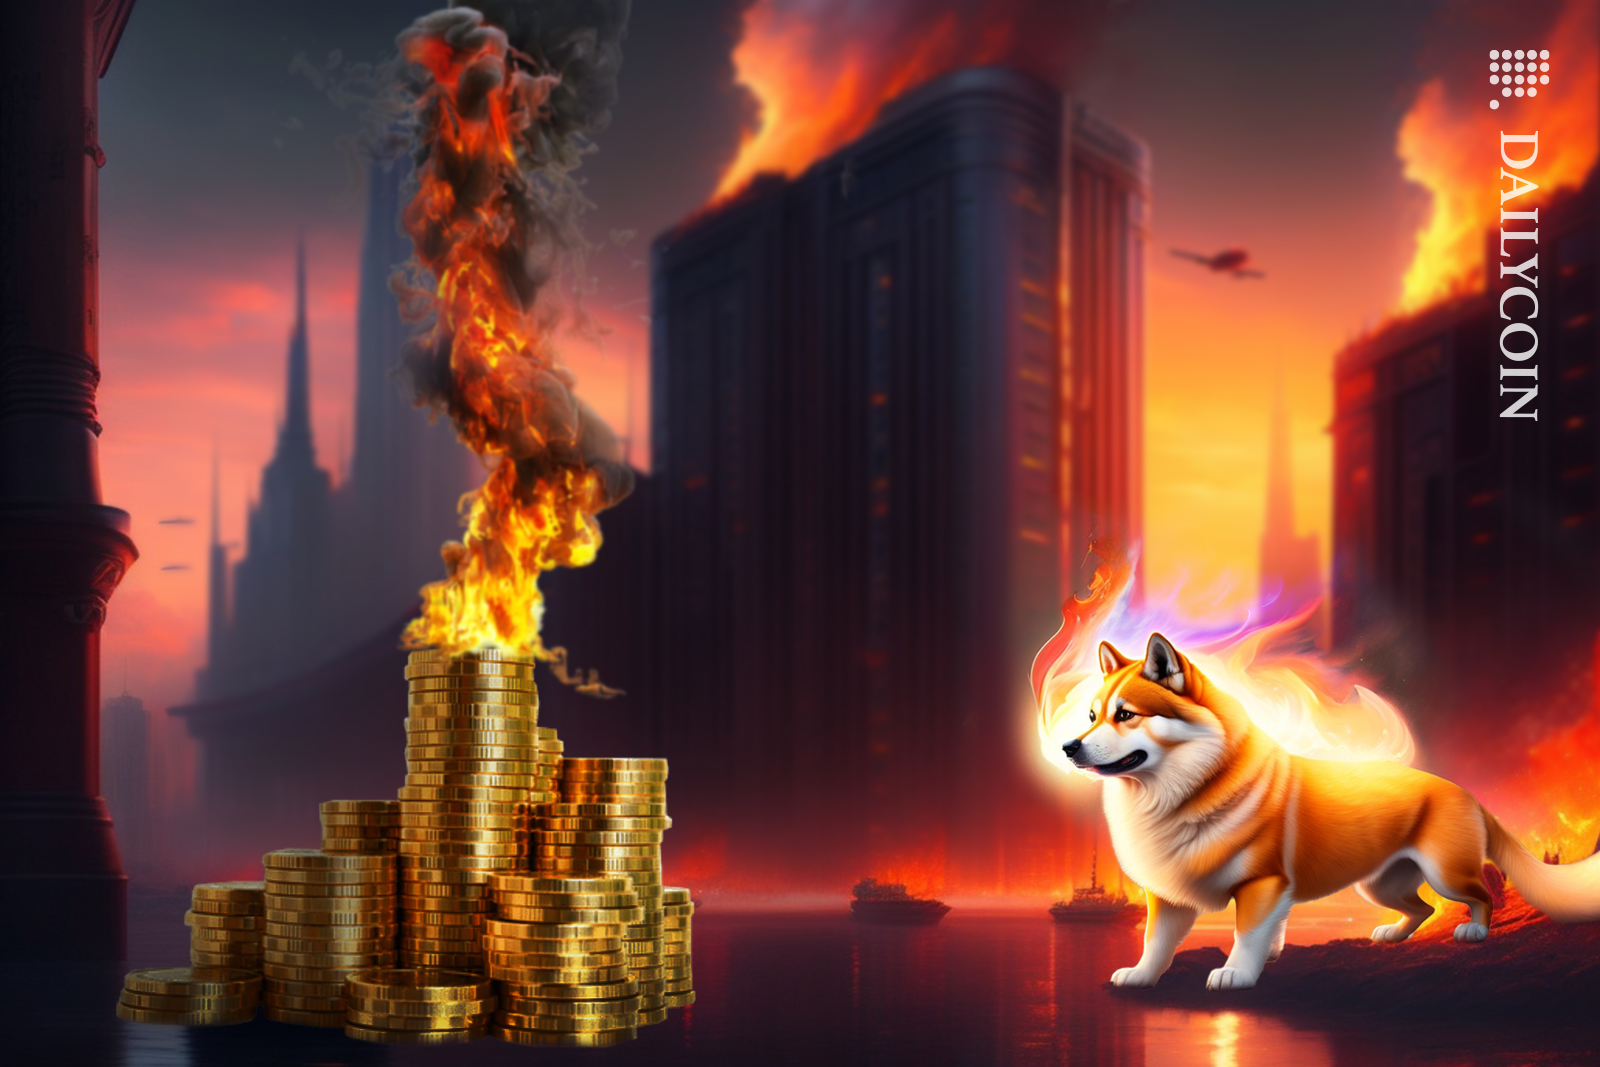 Shiba dog on fire looking over at the burning coins whist being in a city thats also on fire.